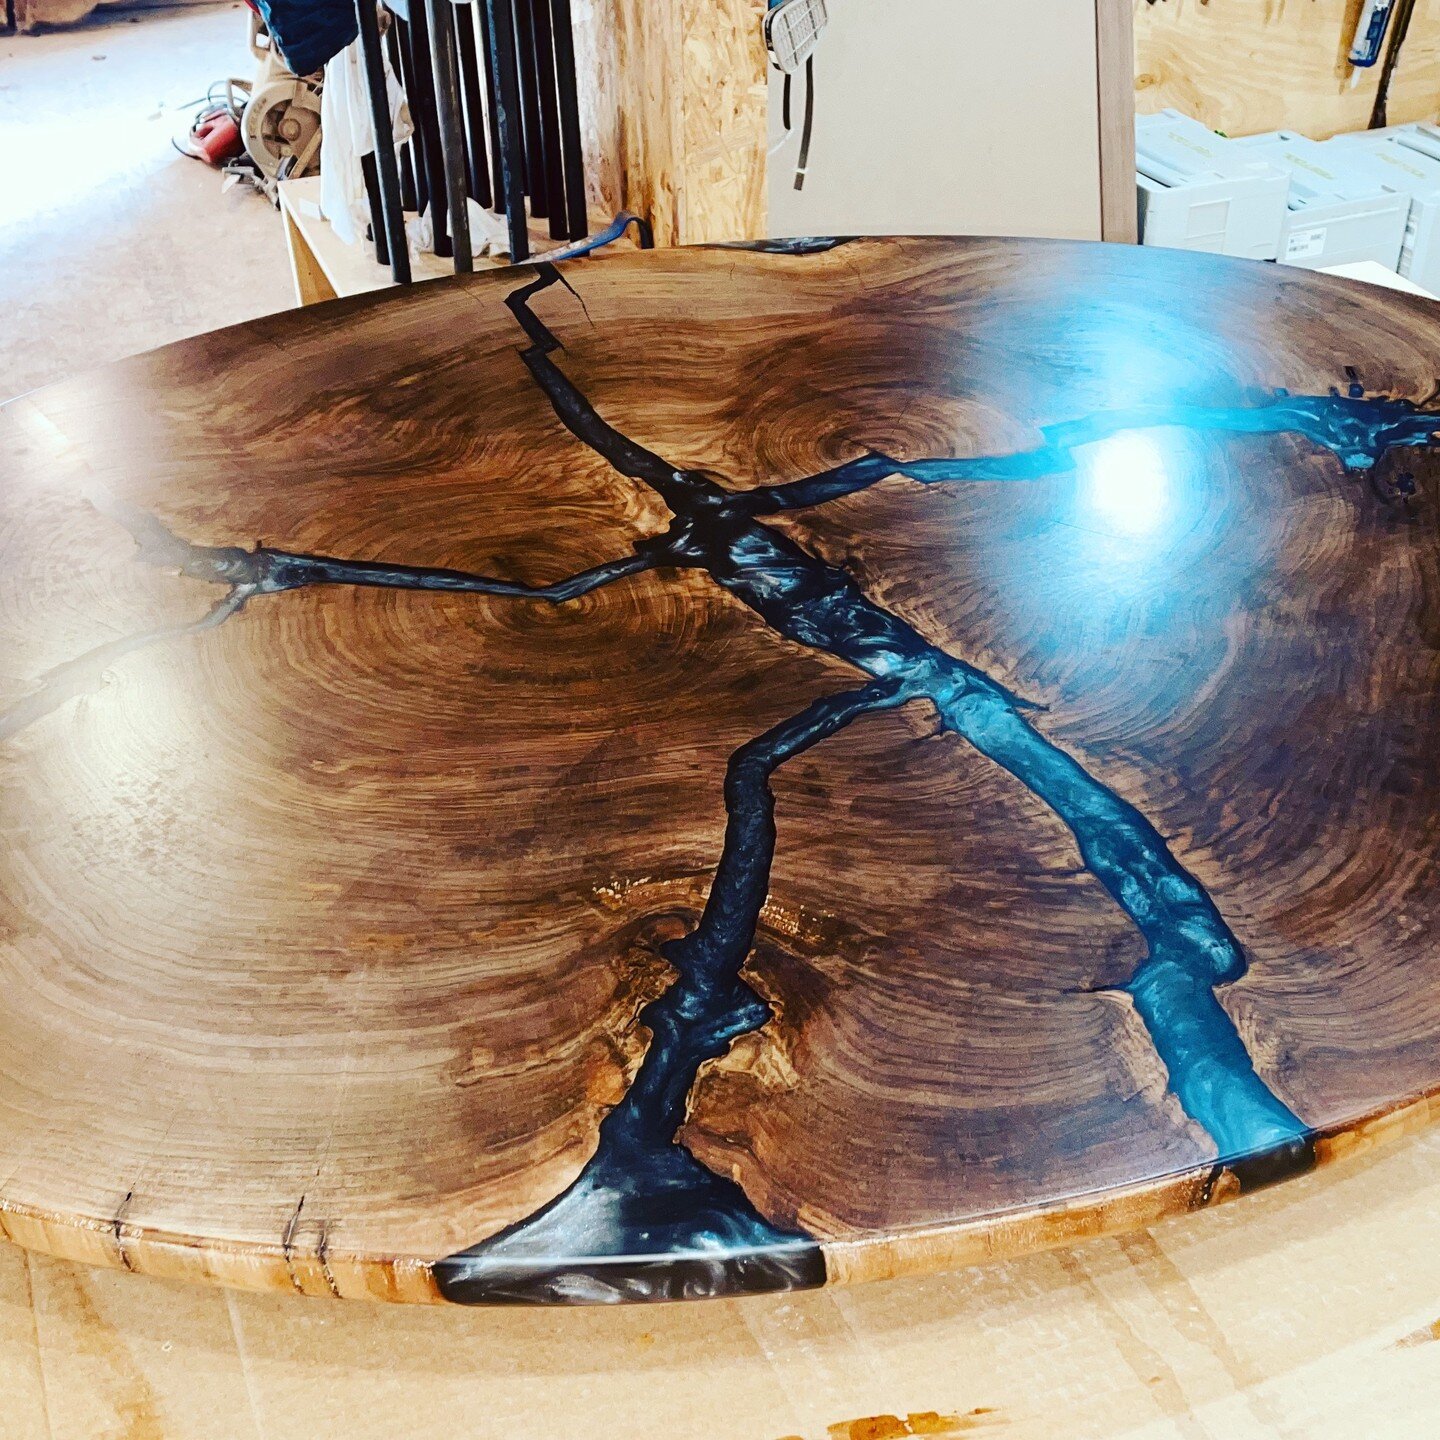 AWESOME Black Walnut trunk slices!! Two of them are elipses, measuring 48&quot;L x 36&quot;W, the other is round and is 37&quot;. All will make amazing coffee tables. What do think?
#madeinvermont#custommade#hugeblackwalnut#coffeetable#table#woodwith